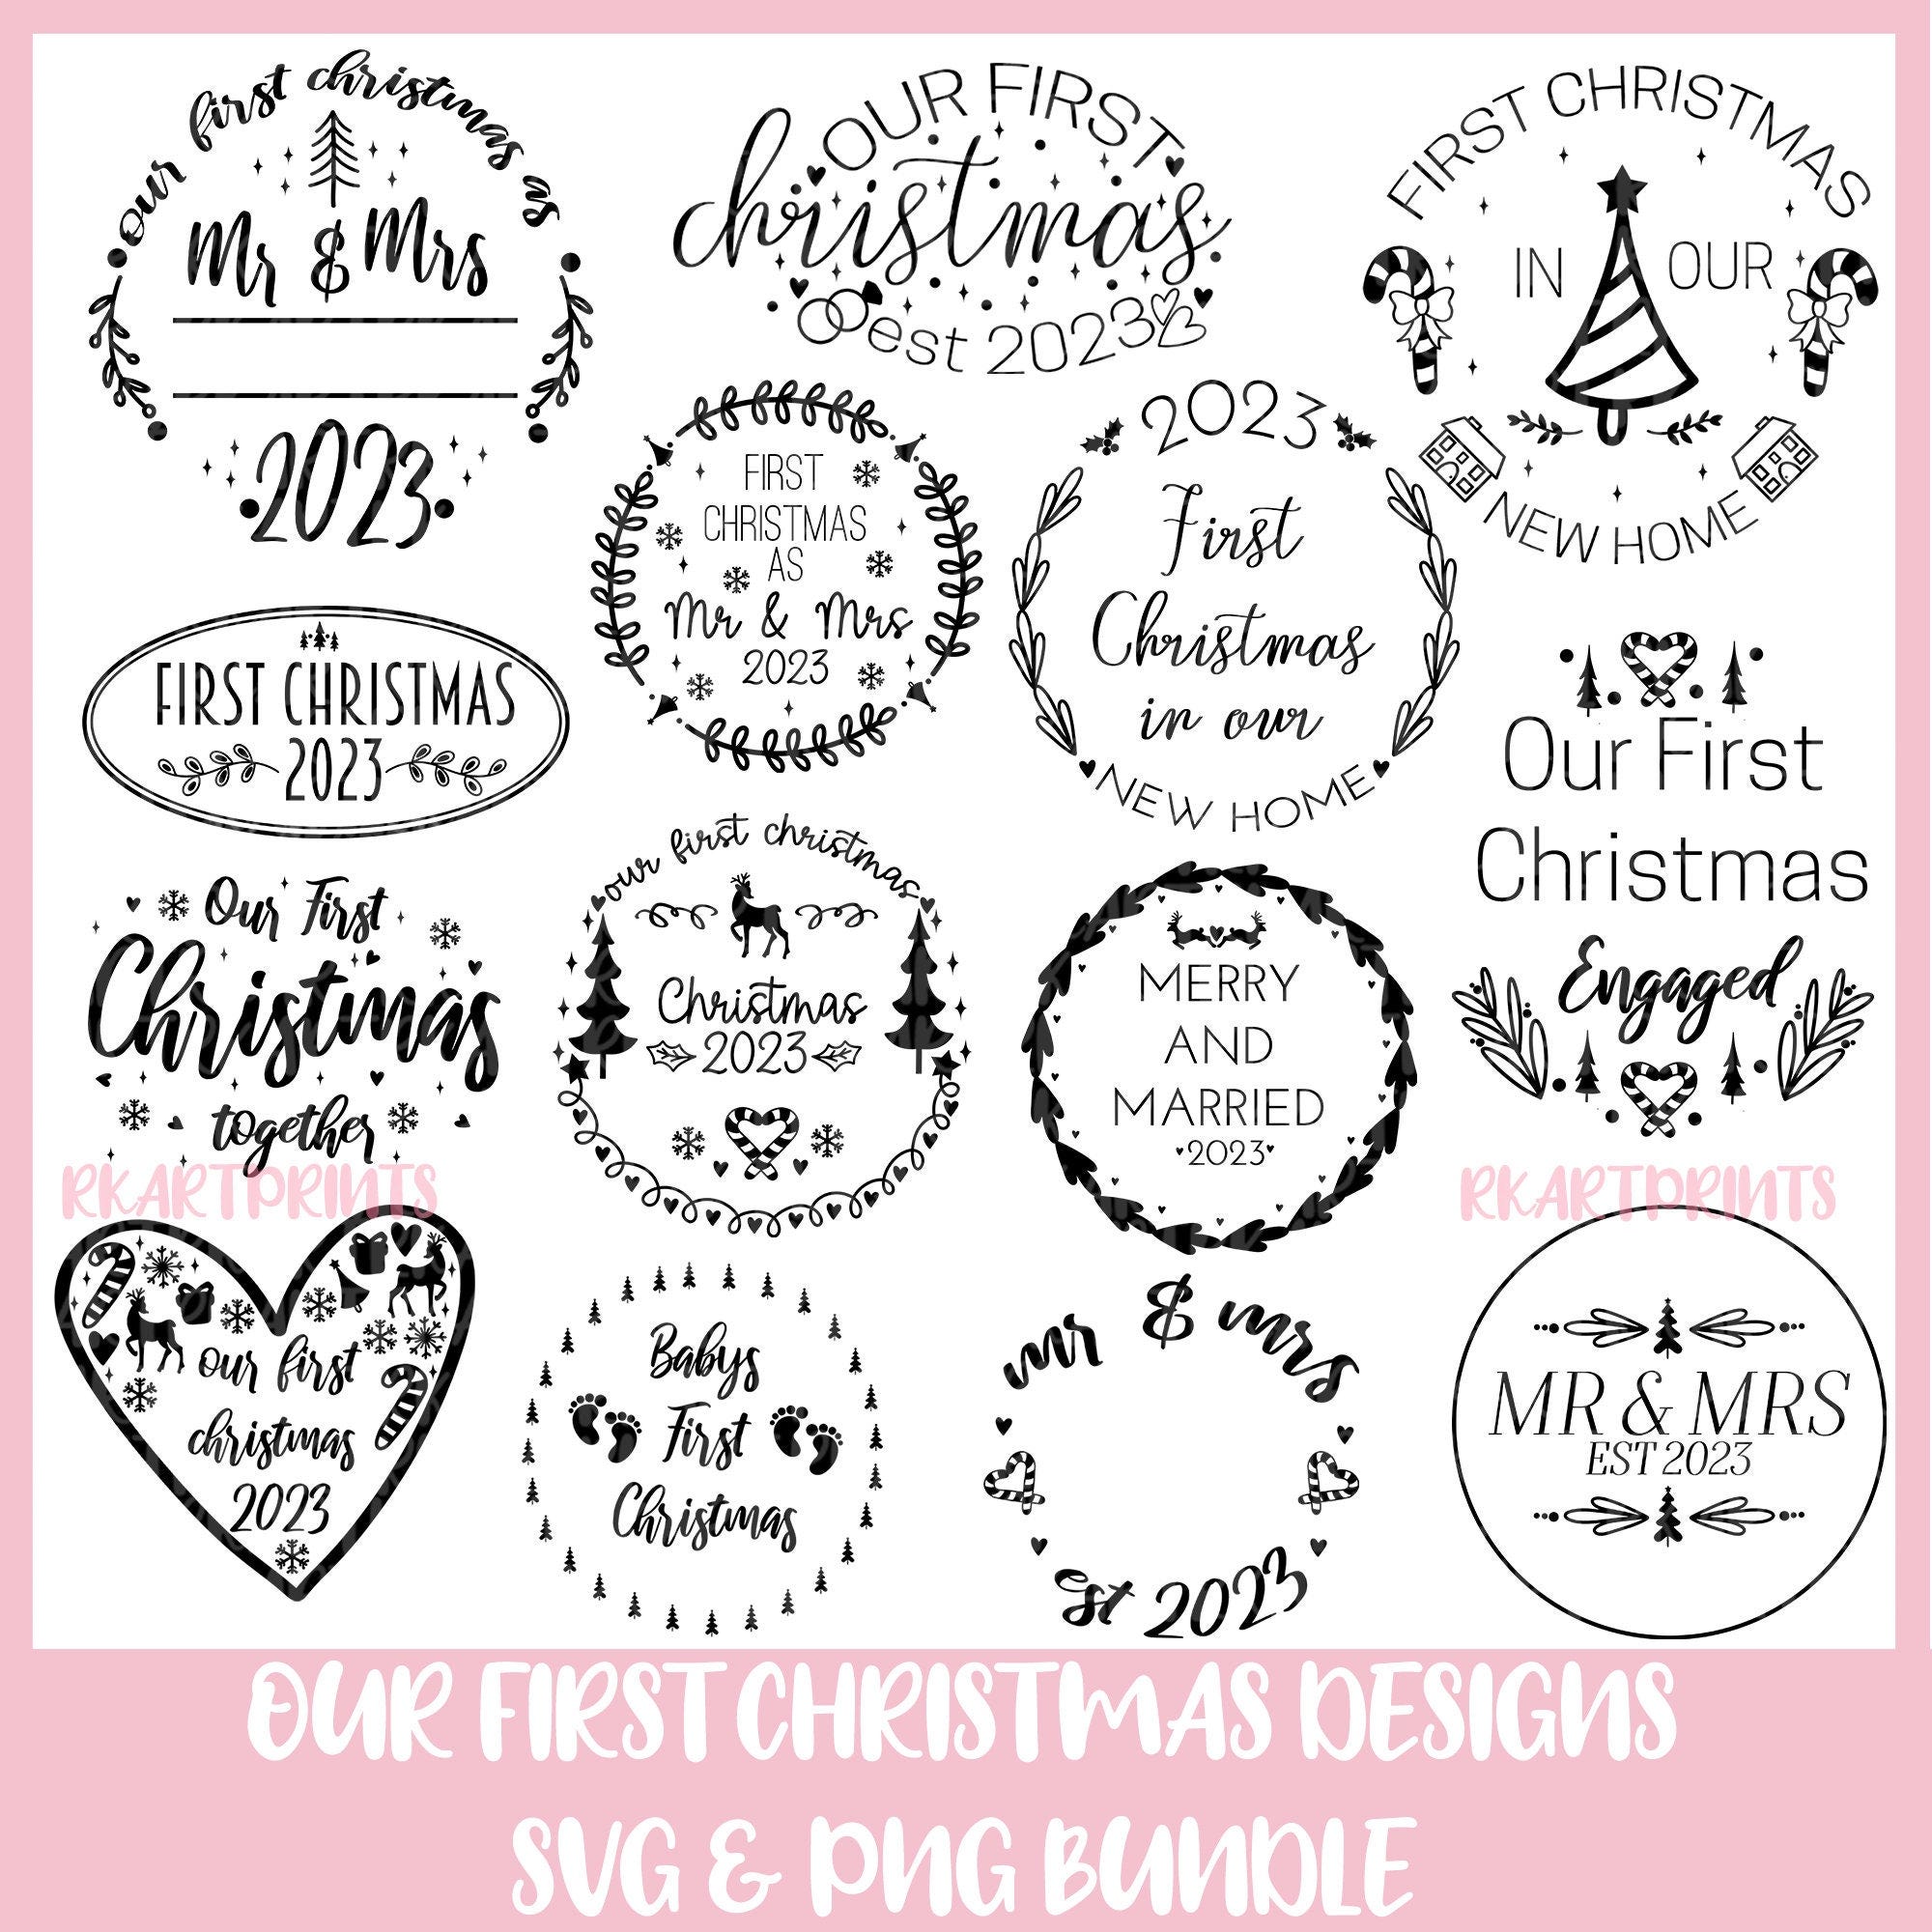 Our first Christmas 2023 svg bundle, First Christmas 2023 Ornament SVG Bundle, Wedding First Christmas Ornament Svg, Christmas Ornament svg